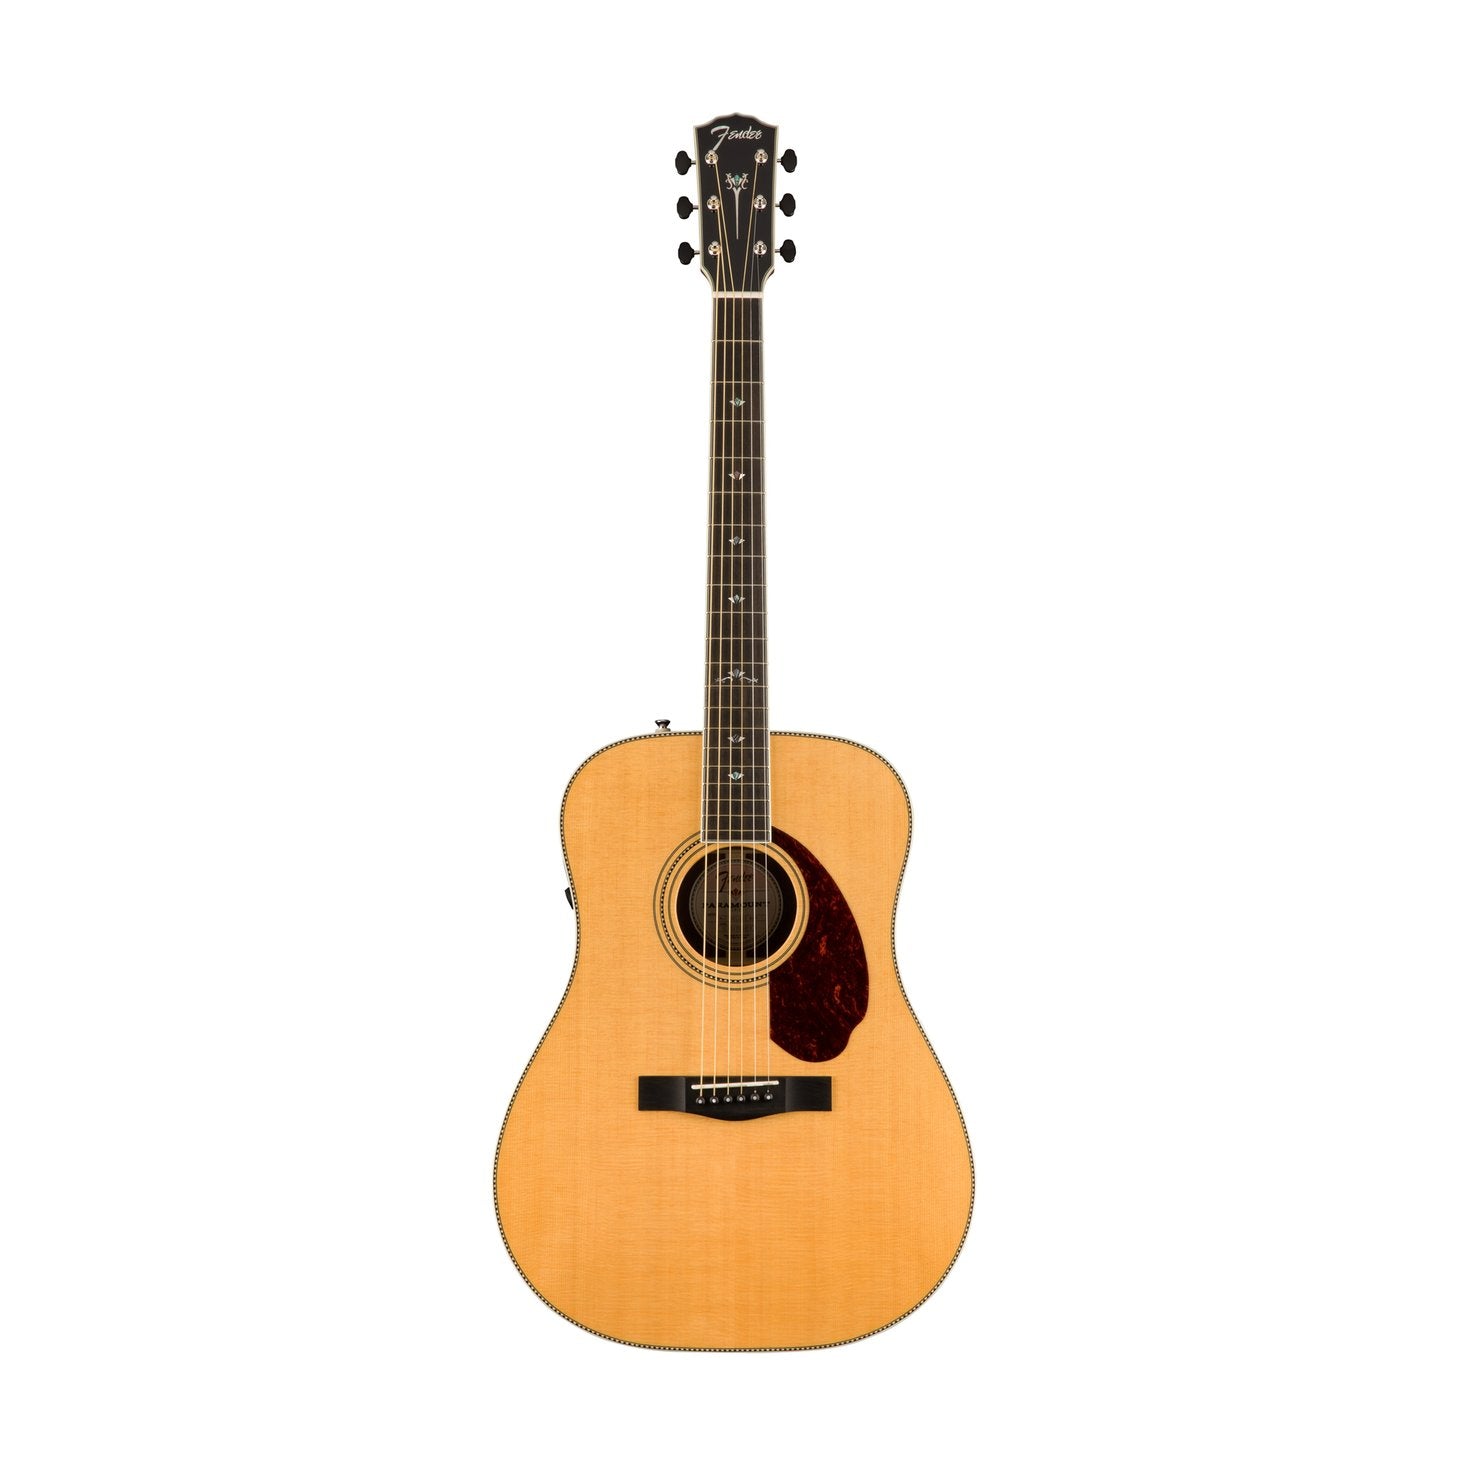 Fender PM-1 Deluxe Dreadnought Acoustic Guitar w/ Case, Natural, FENDER, ACOUSTIC GUITAR, fender-acoustic-guitar-f03-096-0270-221, ZOSO MUSIC SDN BHD